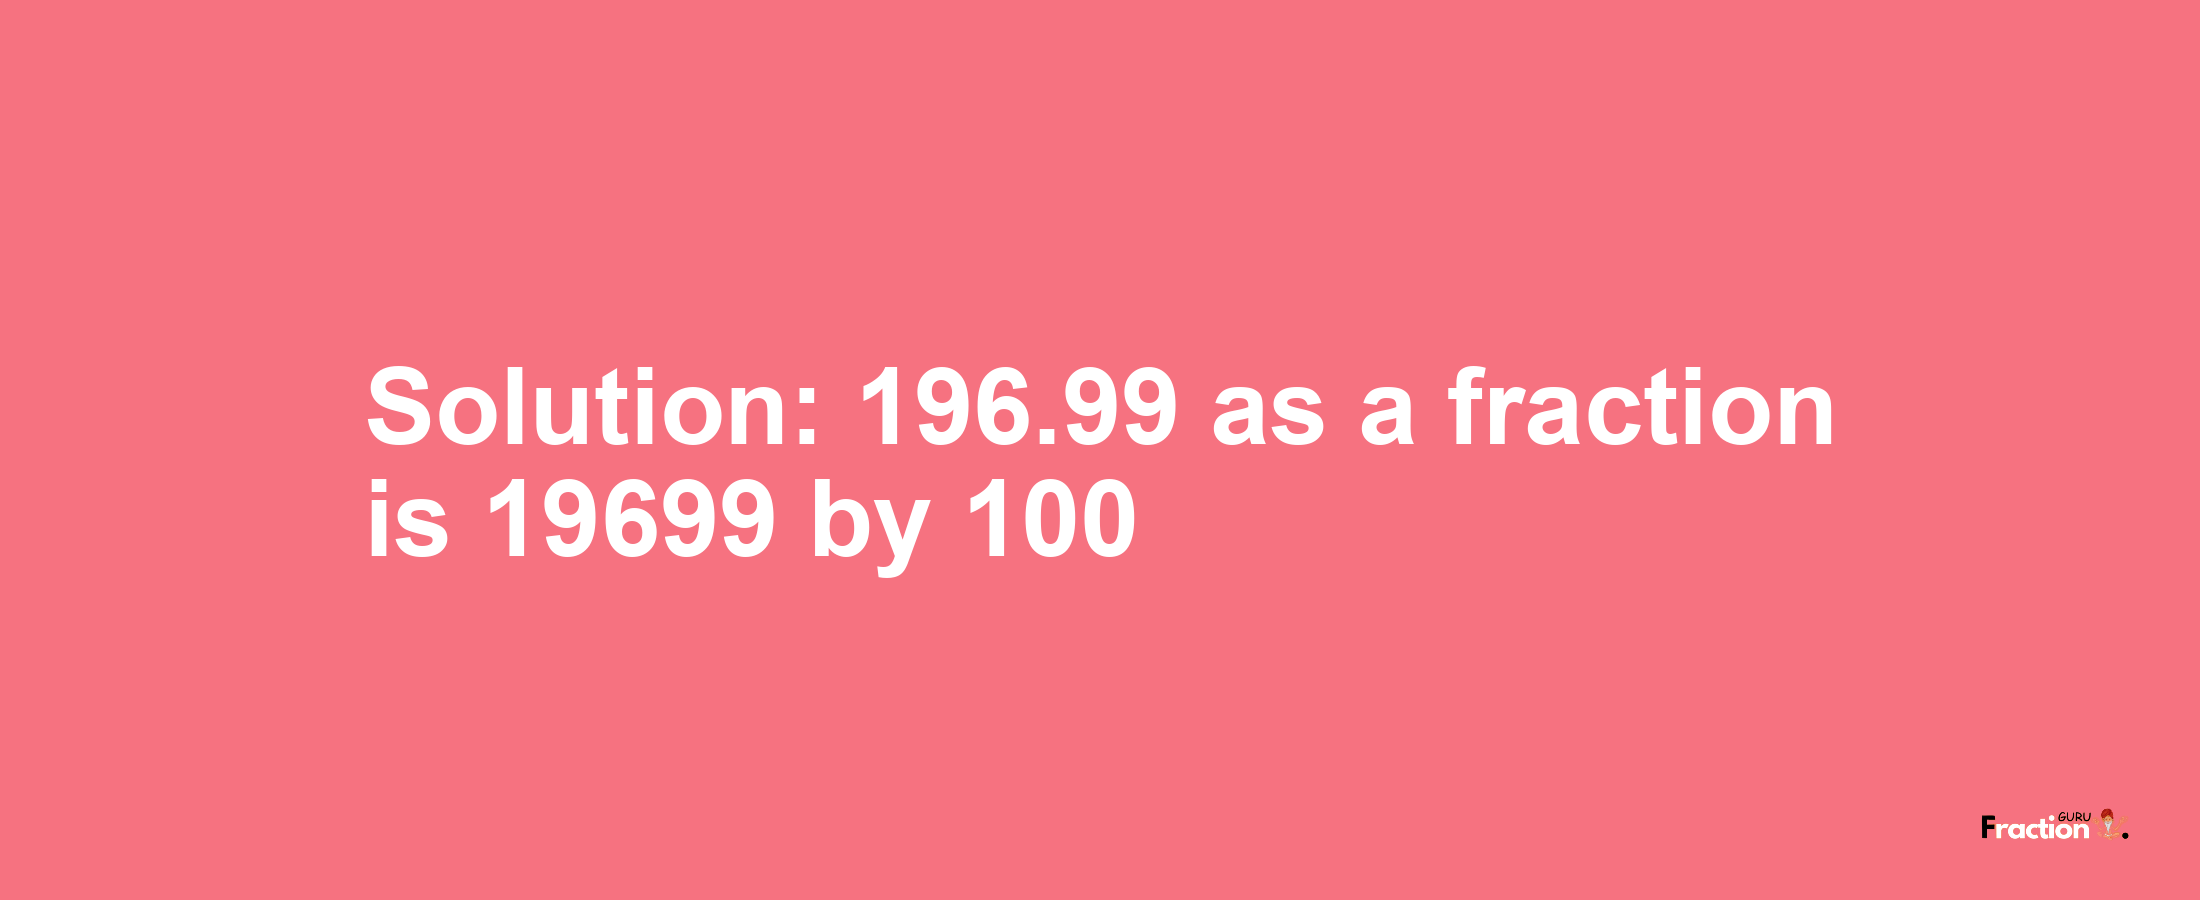 Solution:196.99 as a fraction is 19699/100